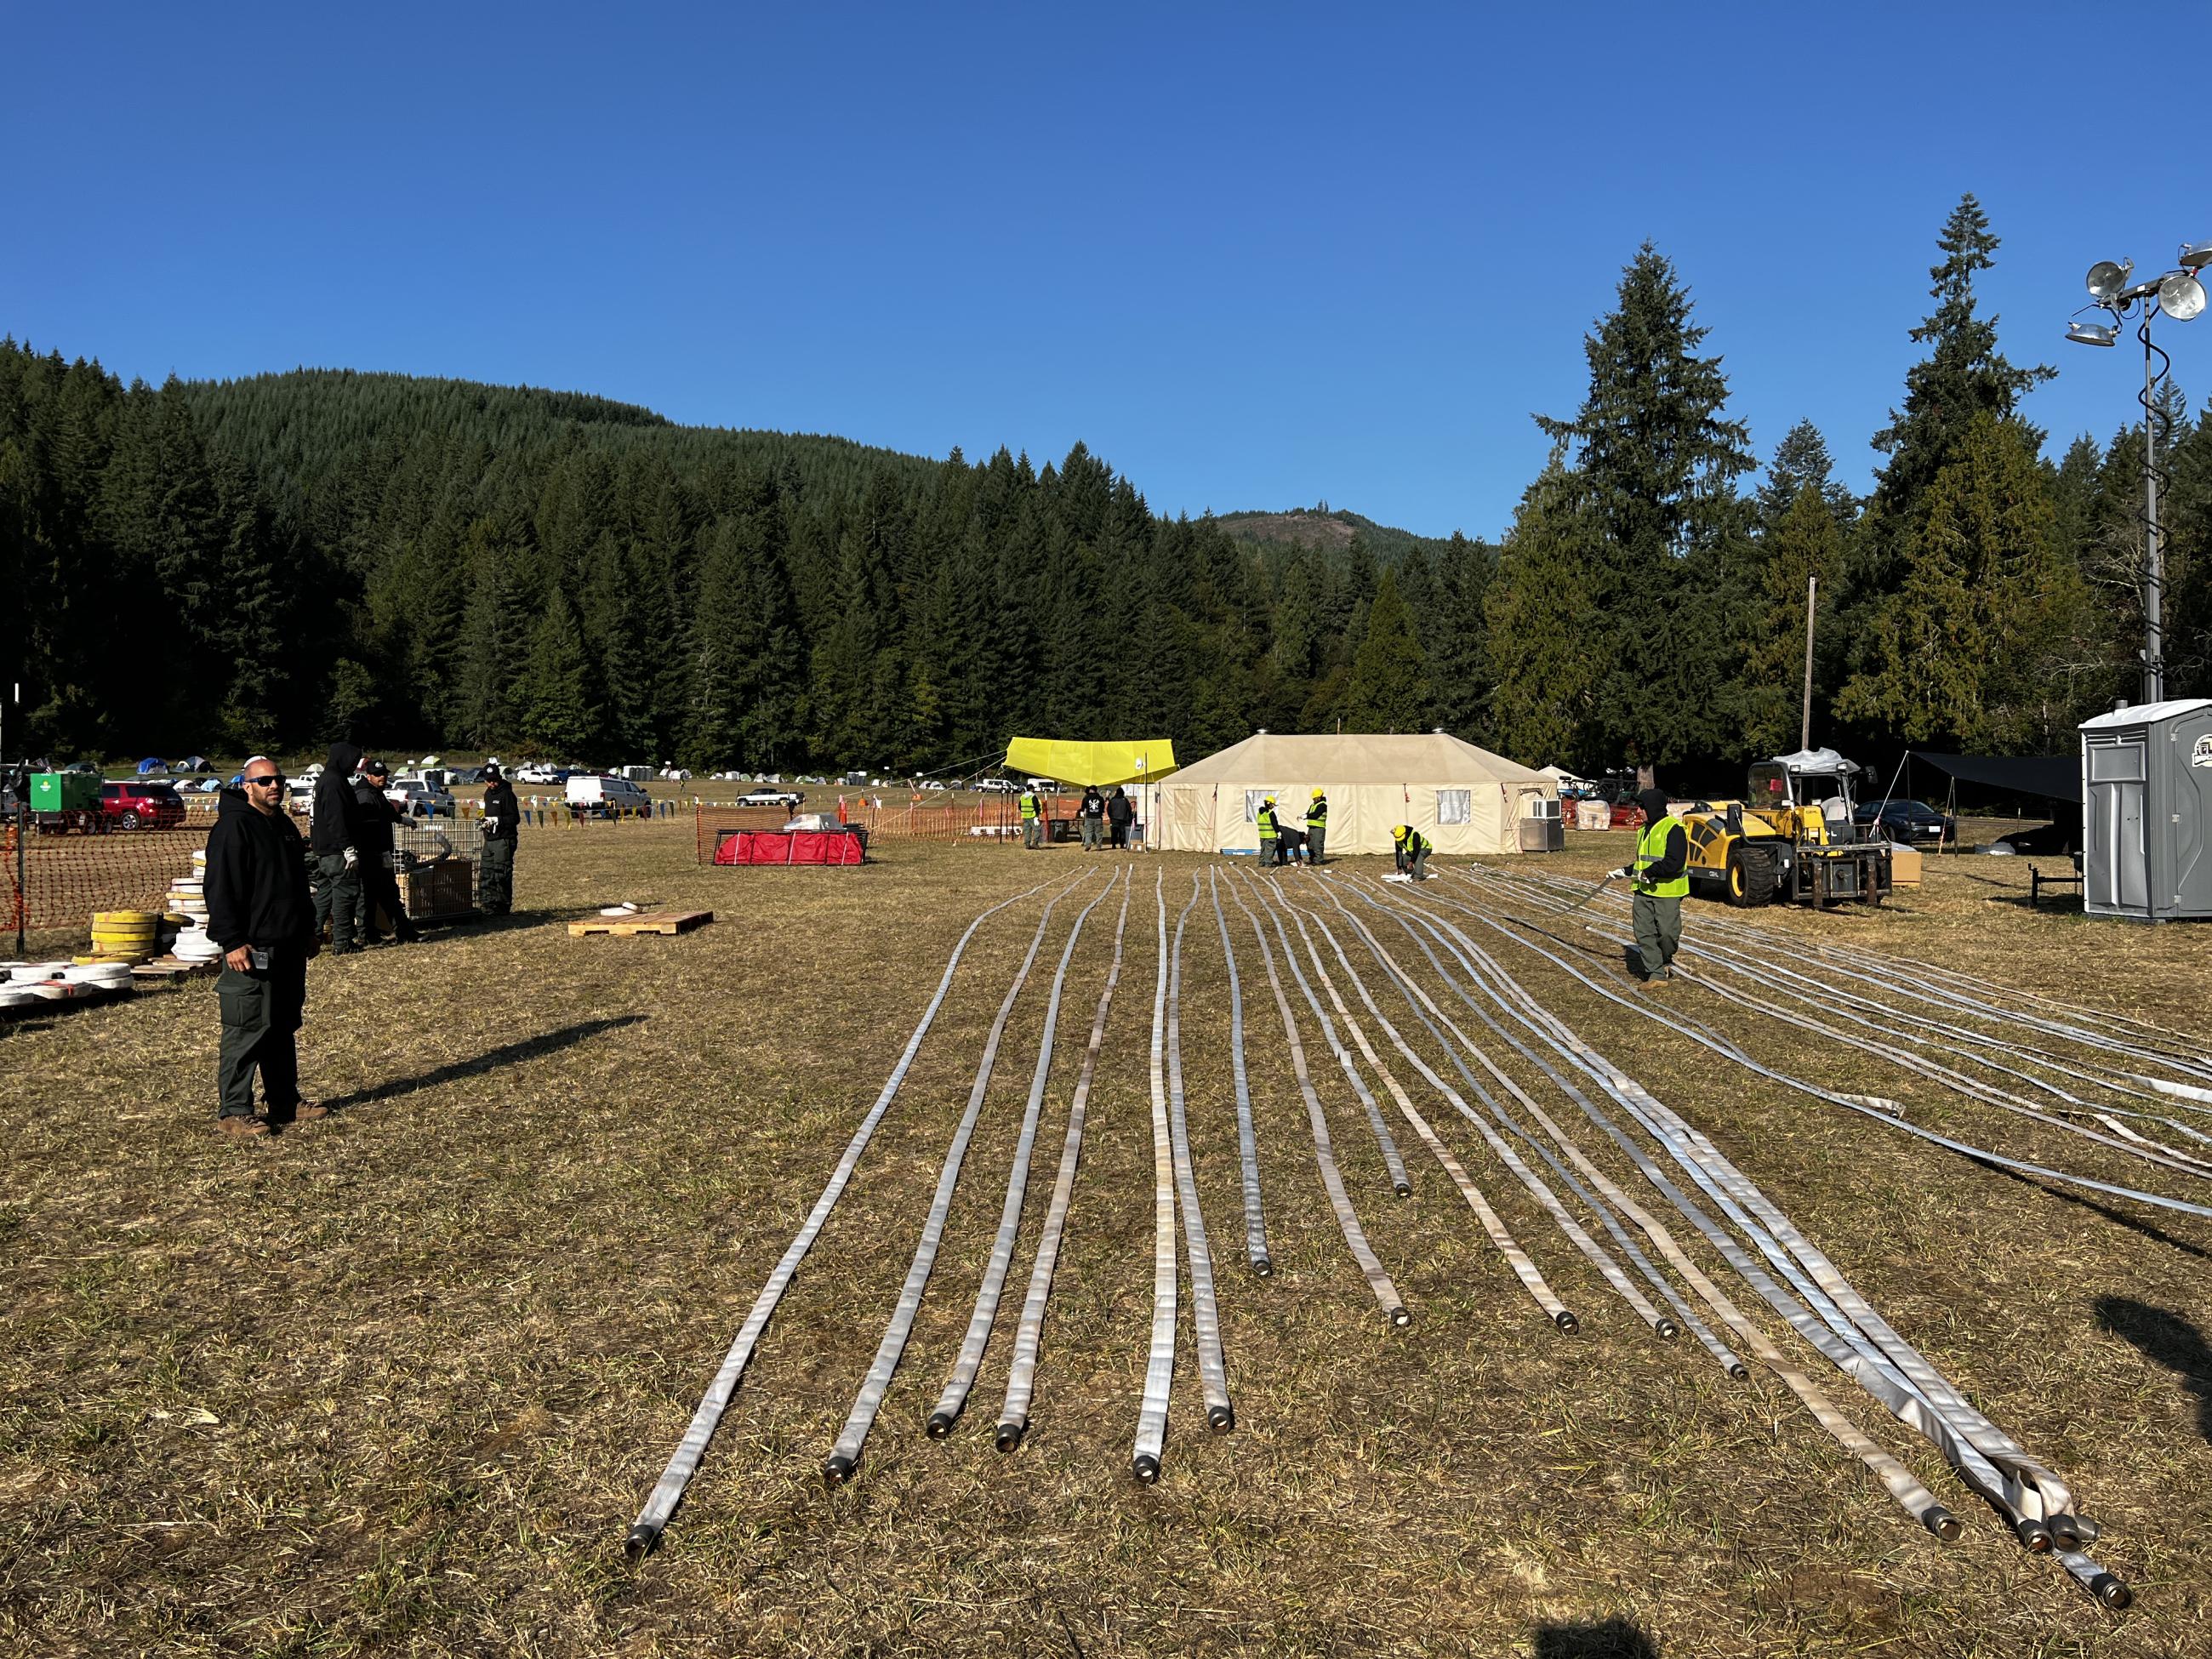 Over two dozen firefighting hoses laid in straight rows